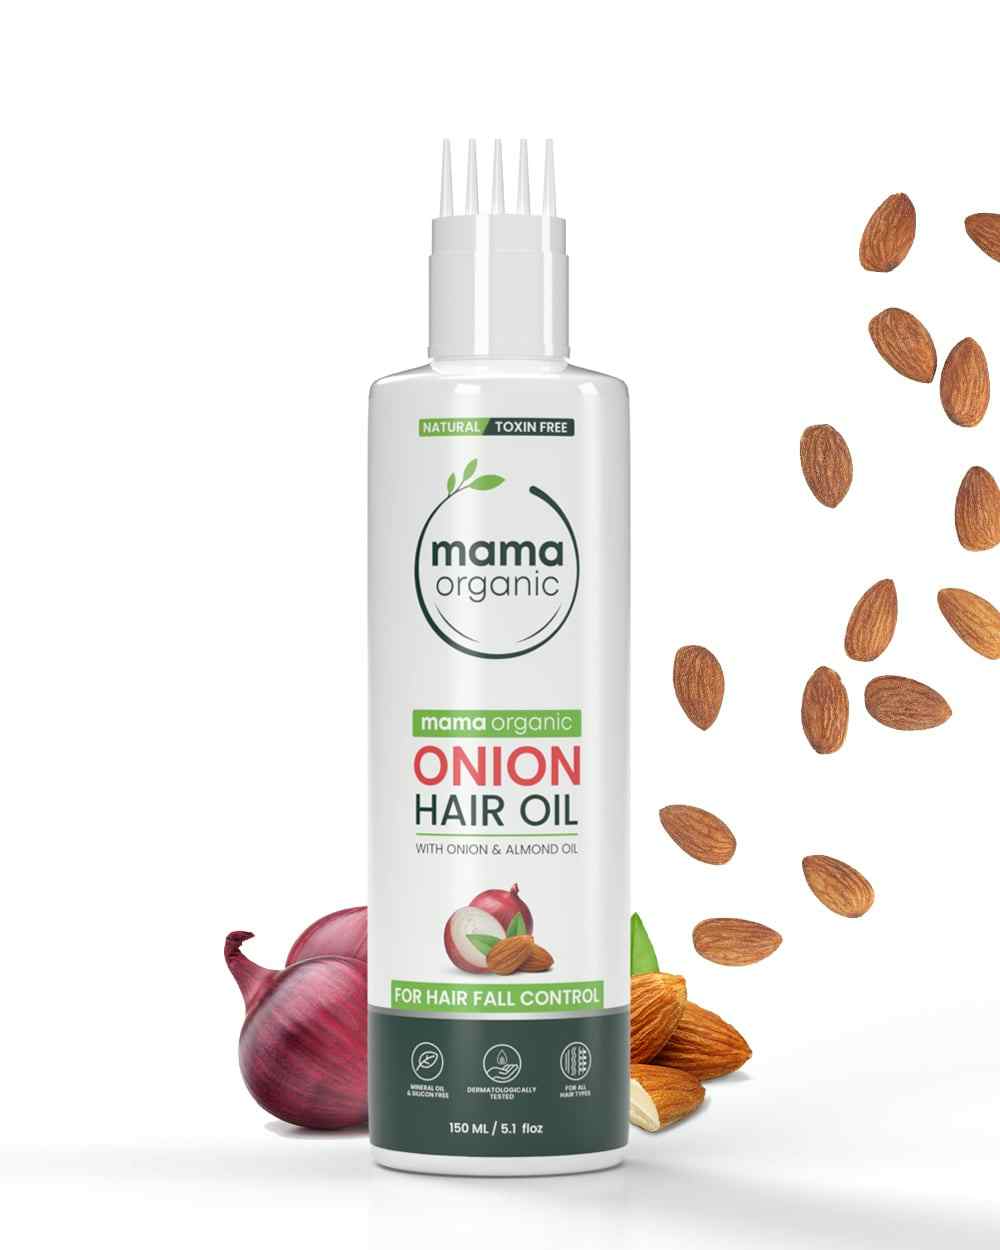 Mamaorganic Onion Hair Oil For Hair Fall Control | With Onion & Almond Oil | For Men & Women | Natural & Toxin-Free - 150ml